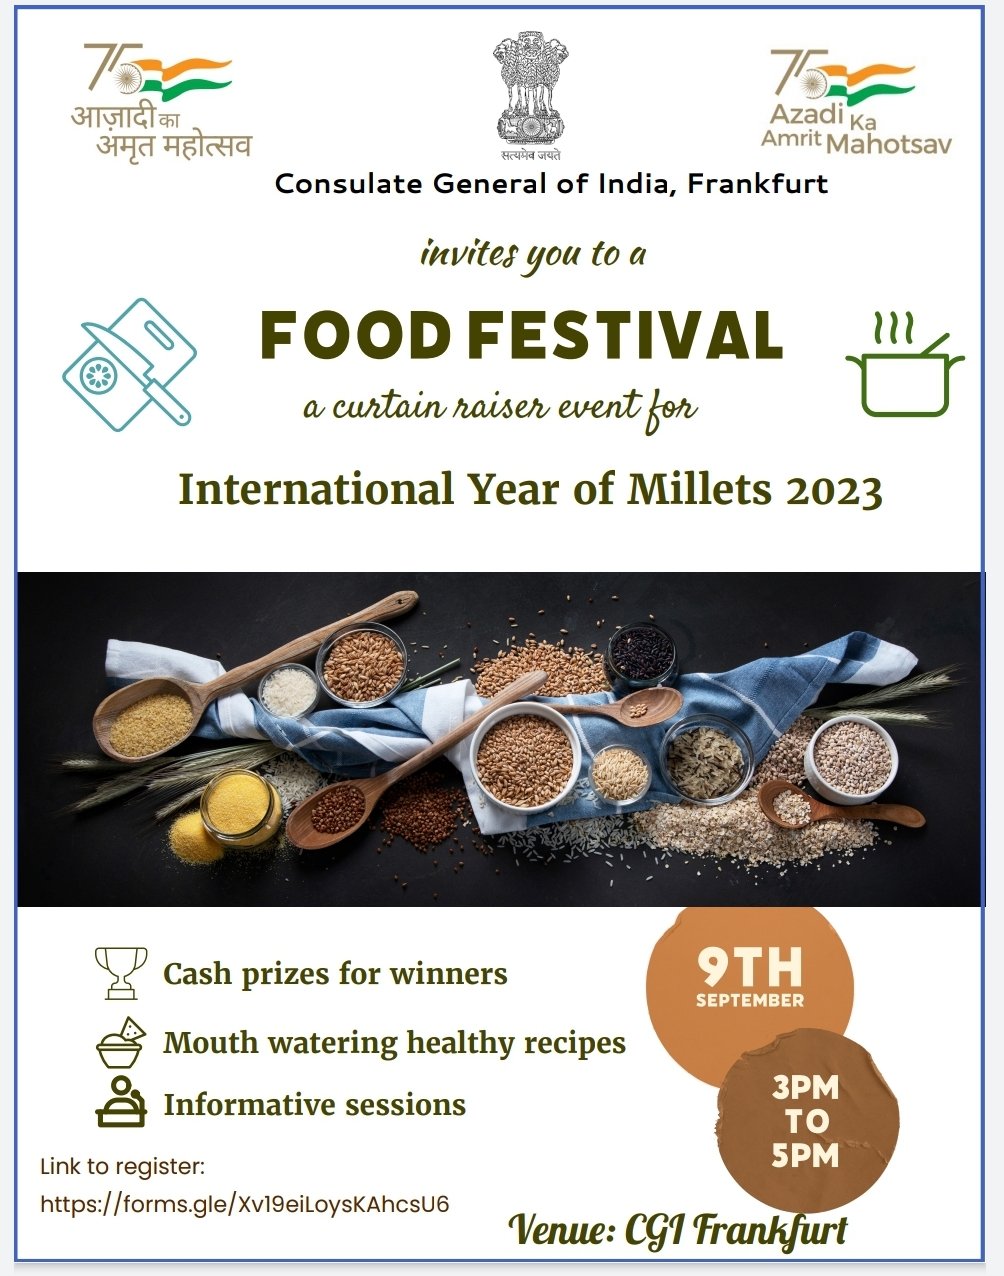 CGI Frankfurt Invites you to a Food Festival a curtain raiser event for  International Year of Millets in 2023 